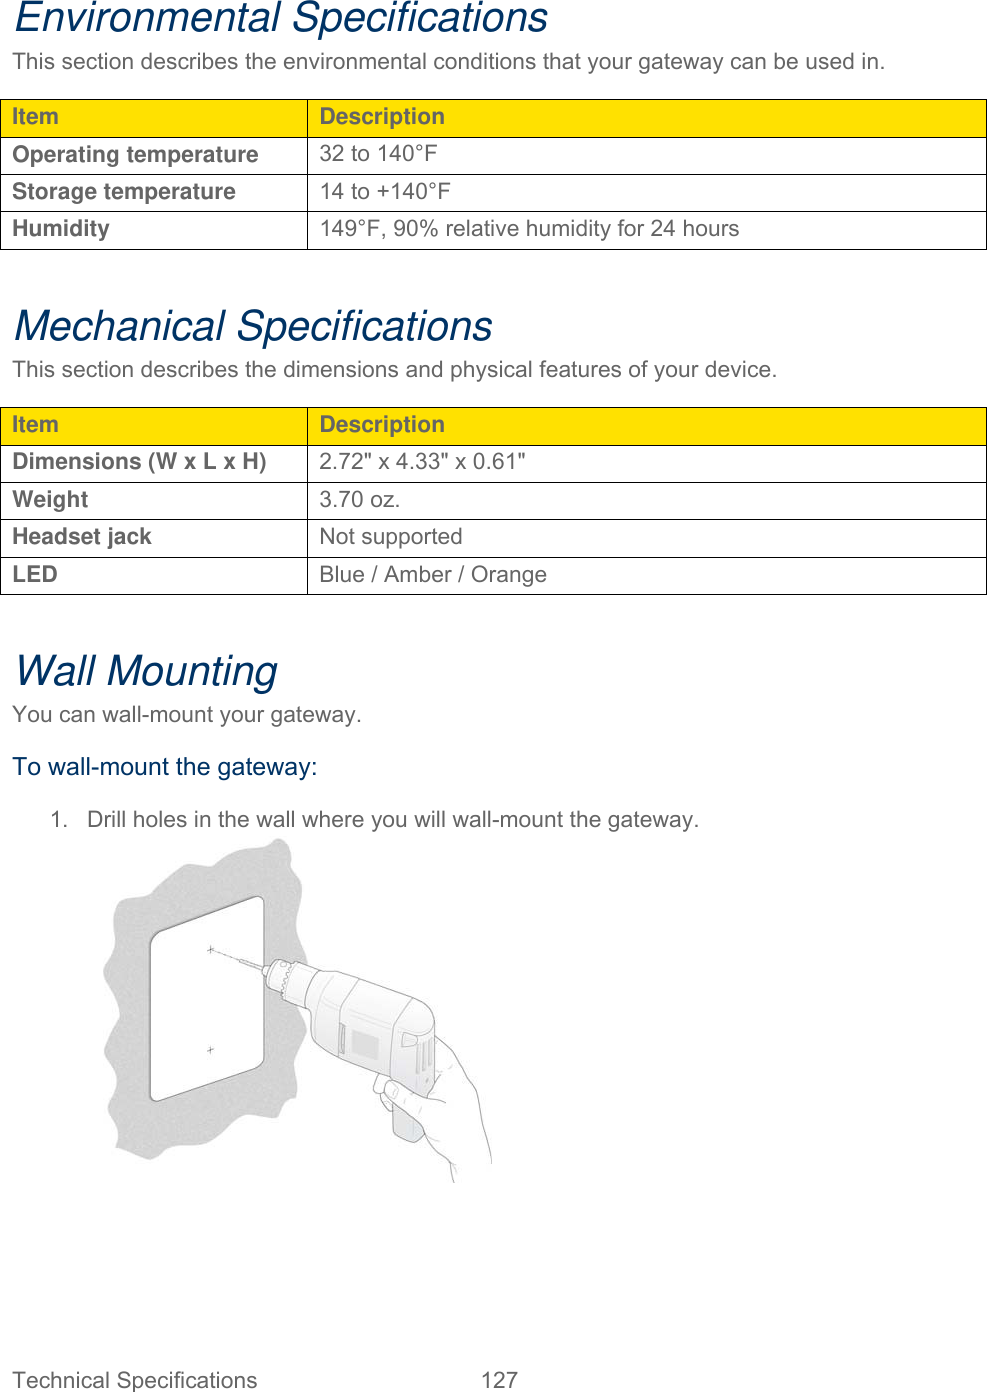 Technical Specifications  127   Environmental Specifications This section describes the environmental conditions that your gateway can be used in. Item  Description Operating temperature  32 to 140°F Storage temperature  14 to +140°F Humidity  149°F, 90% relative humidity for 24 hours  Mechanical Specifications This section describes the dimensions and physical features of your device. Item  Description Dimensions (W x L x H)  2.72&quot; x 4.33&quot; x 0.61&quot; Weight  3.70 oz. Headset jack  Not supported LED  Blue / Amber / Orange  Wall Mounting You can wall-mount your gateway. To wall-mount the gateway: 1.  Drill holes in the wall where you will wall-mount the gateway.  